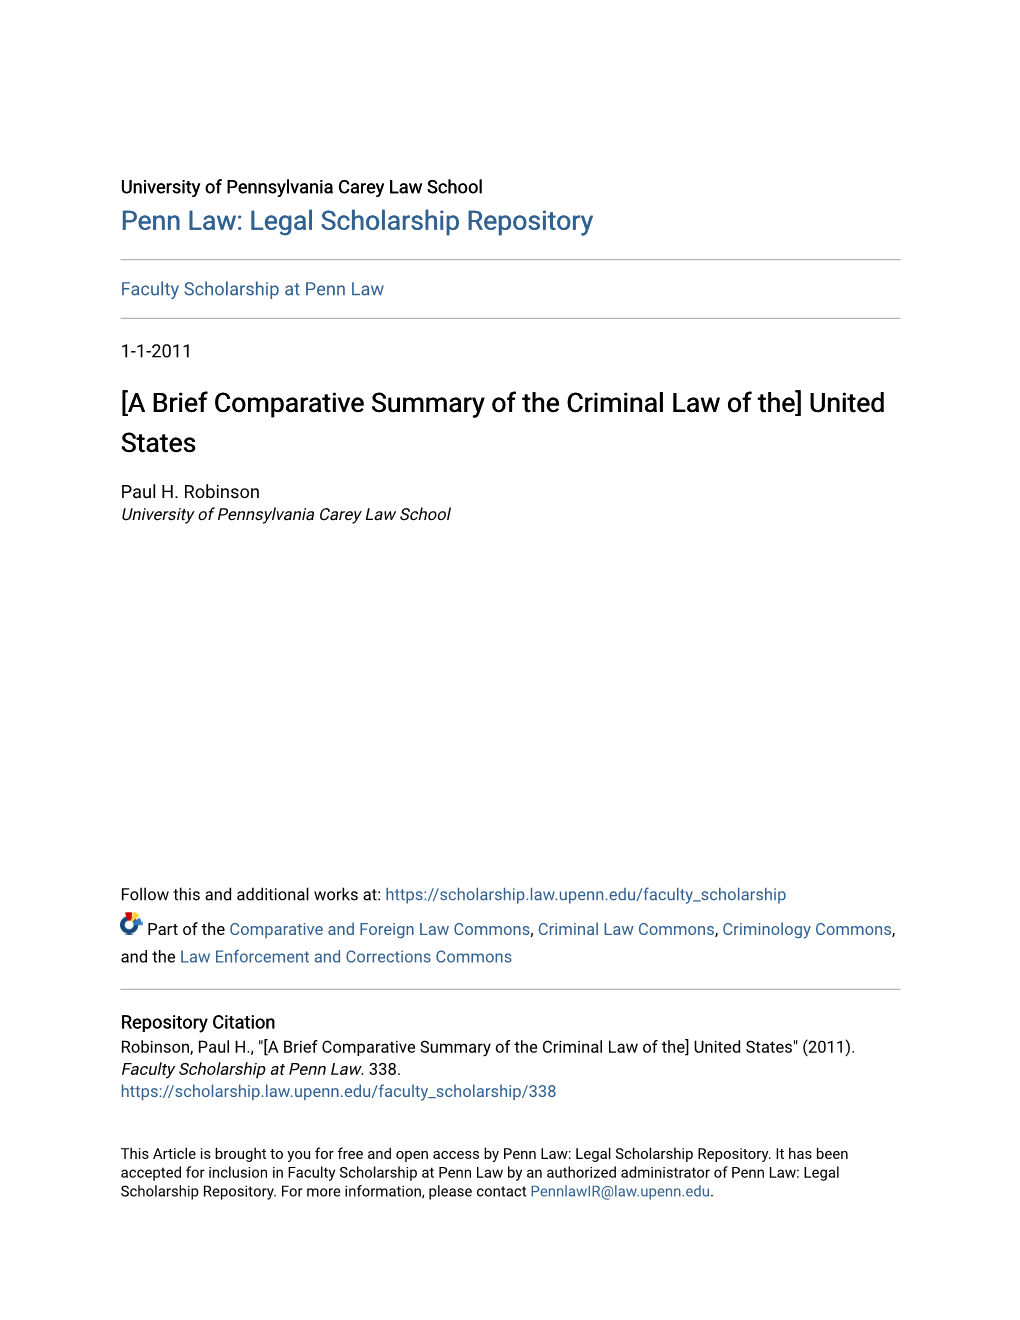 [A Brief Comparative Summary of the Criminal Law of The] United States